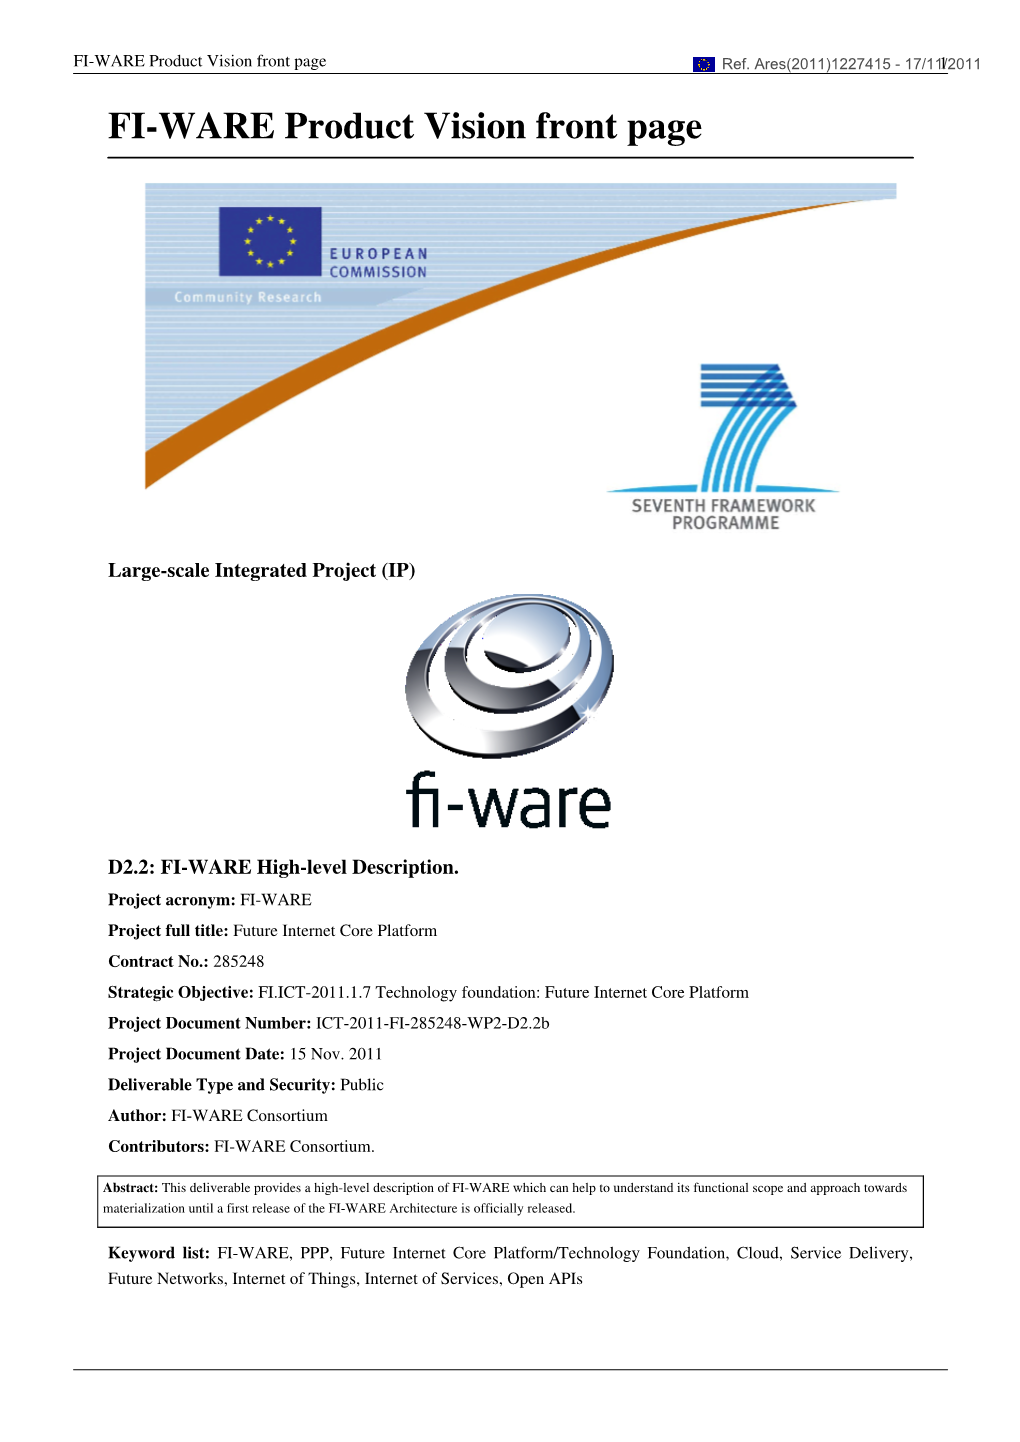 FI-WARE Product Vision Front Page Ref